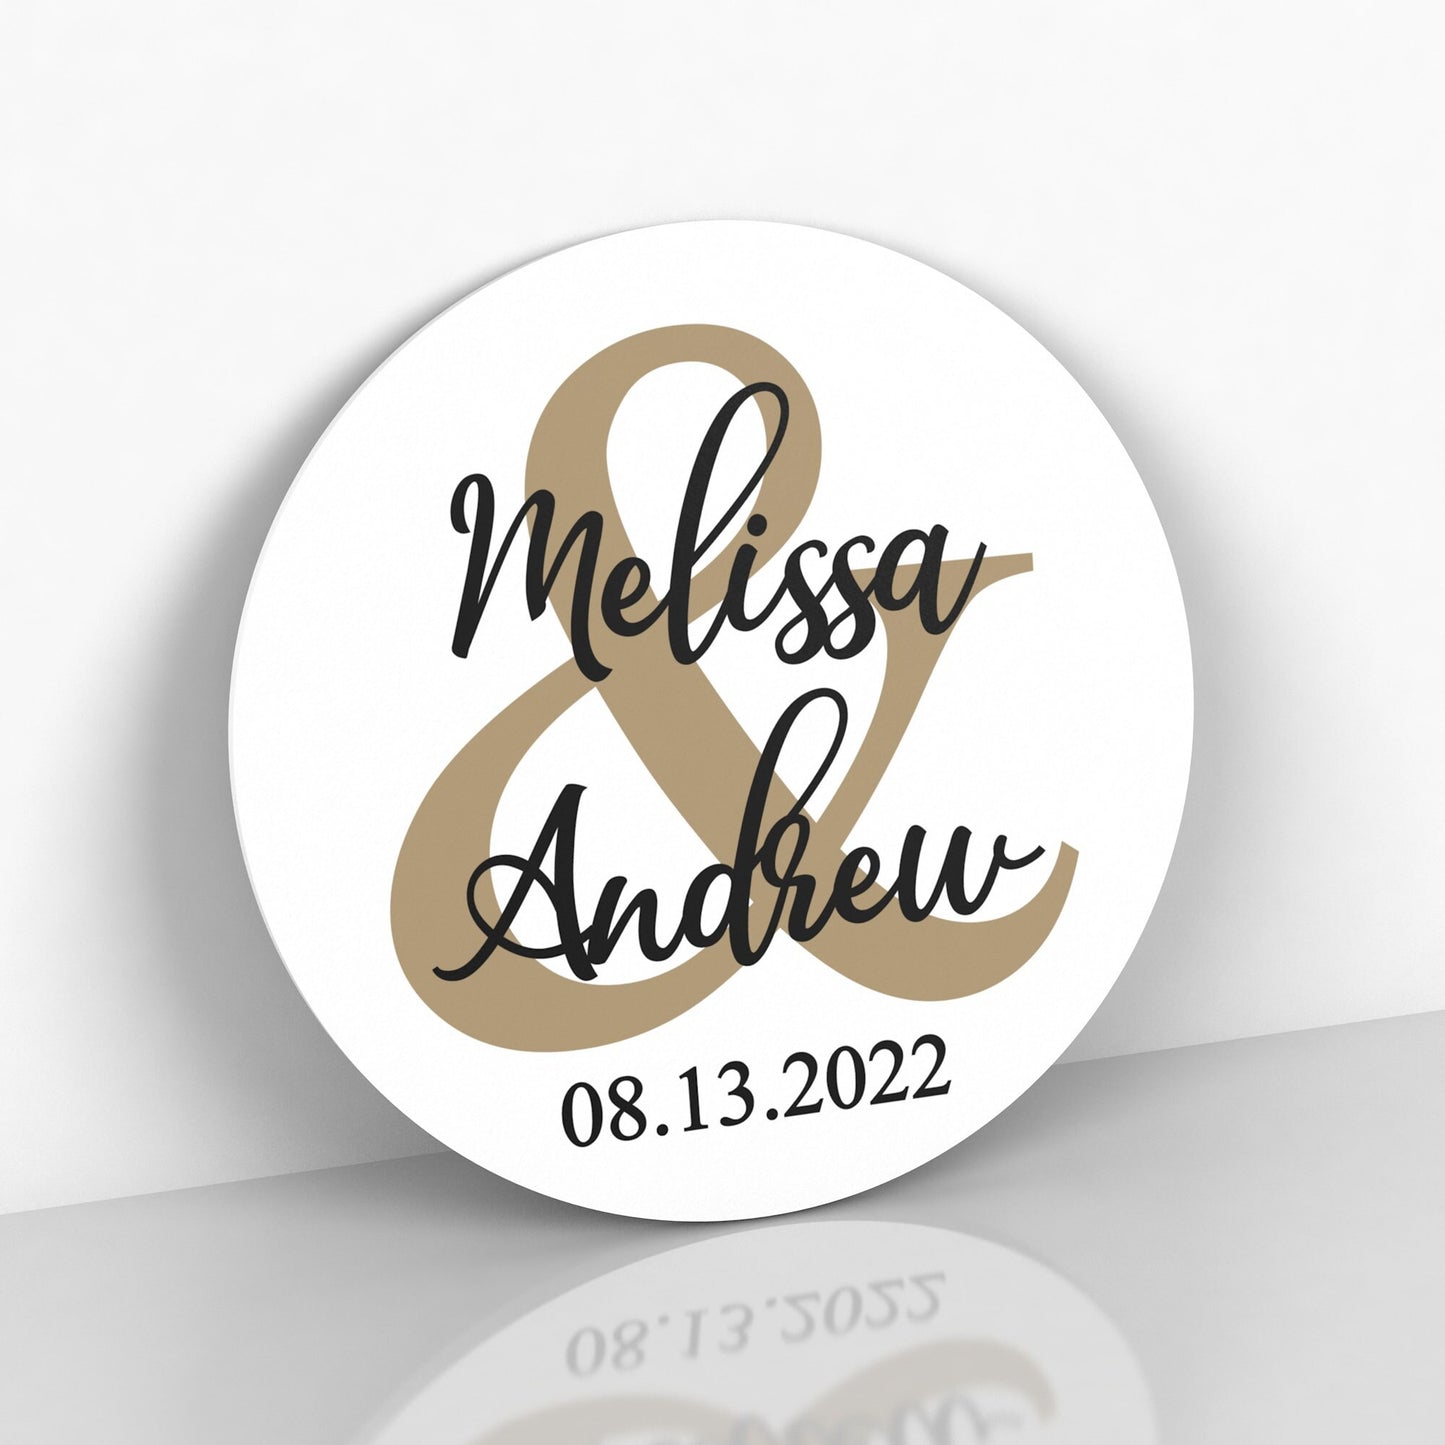 Personalized Name Sign. Dating, Engagement, Wedding, Anniversary Gift. Wedding Decor